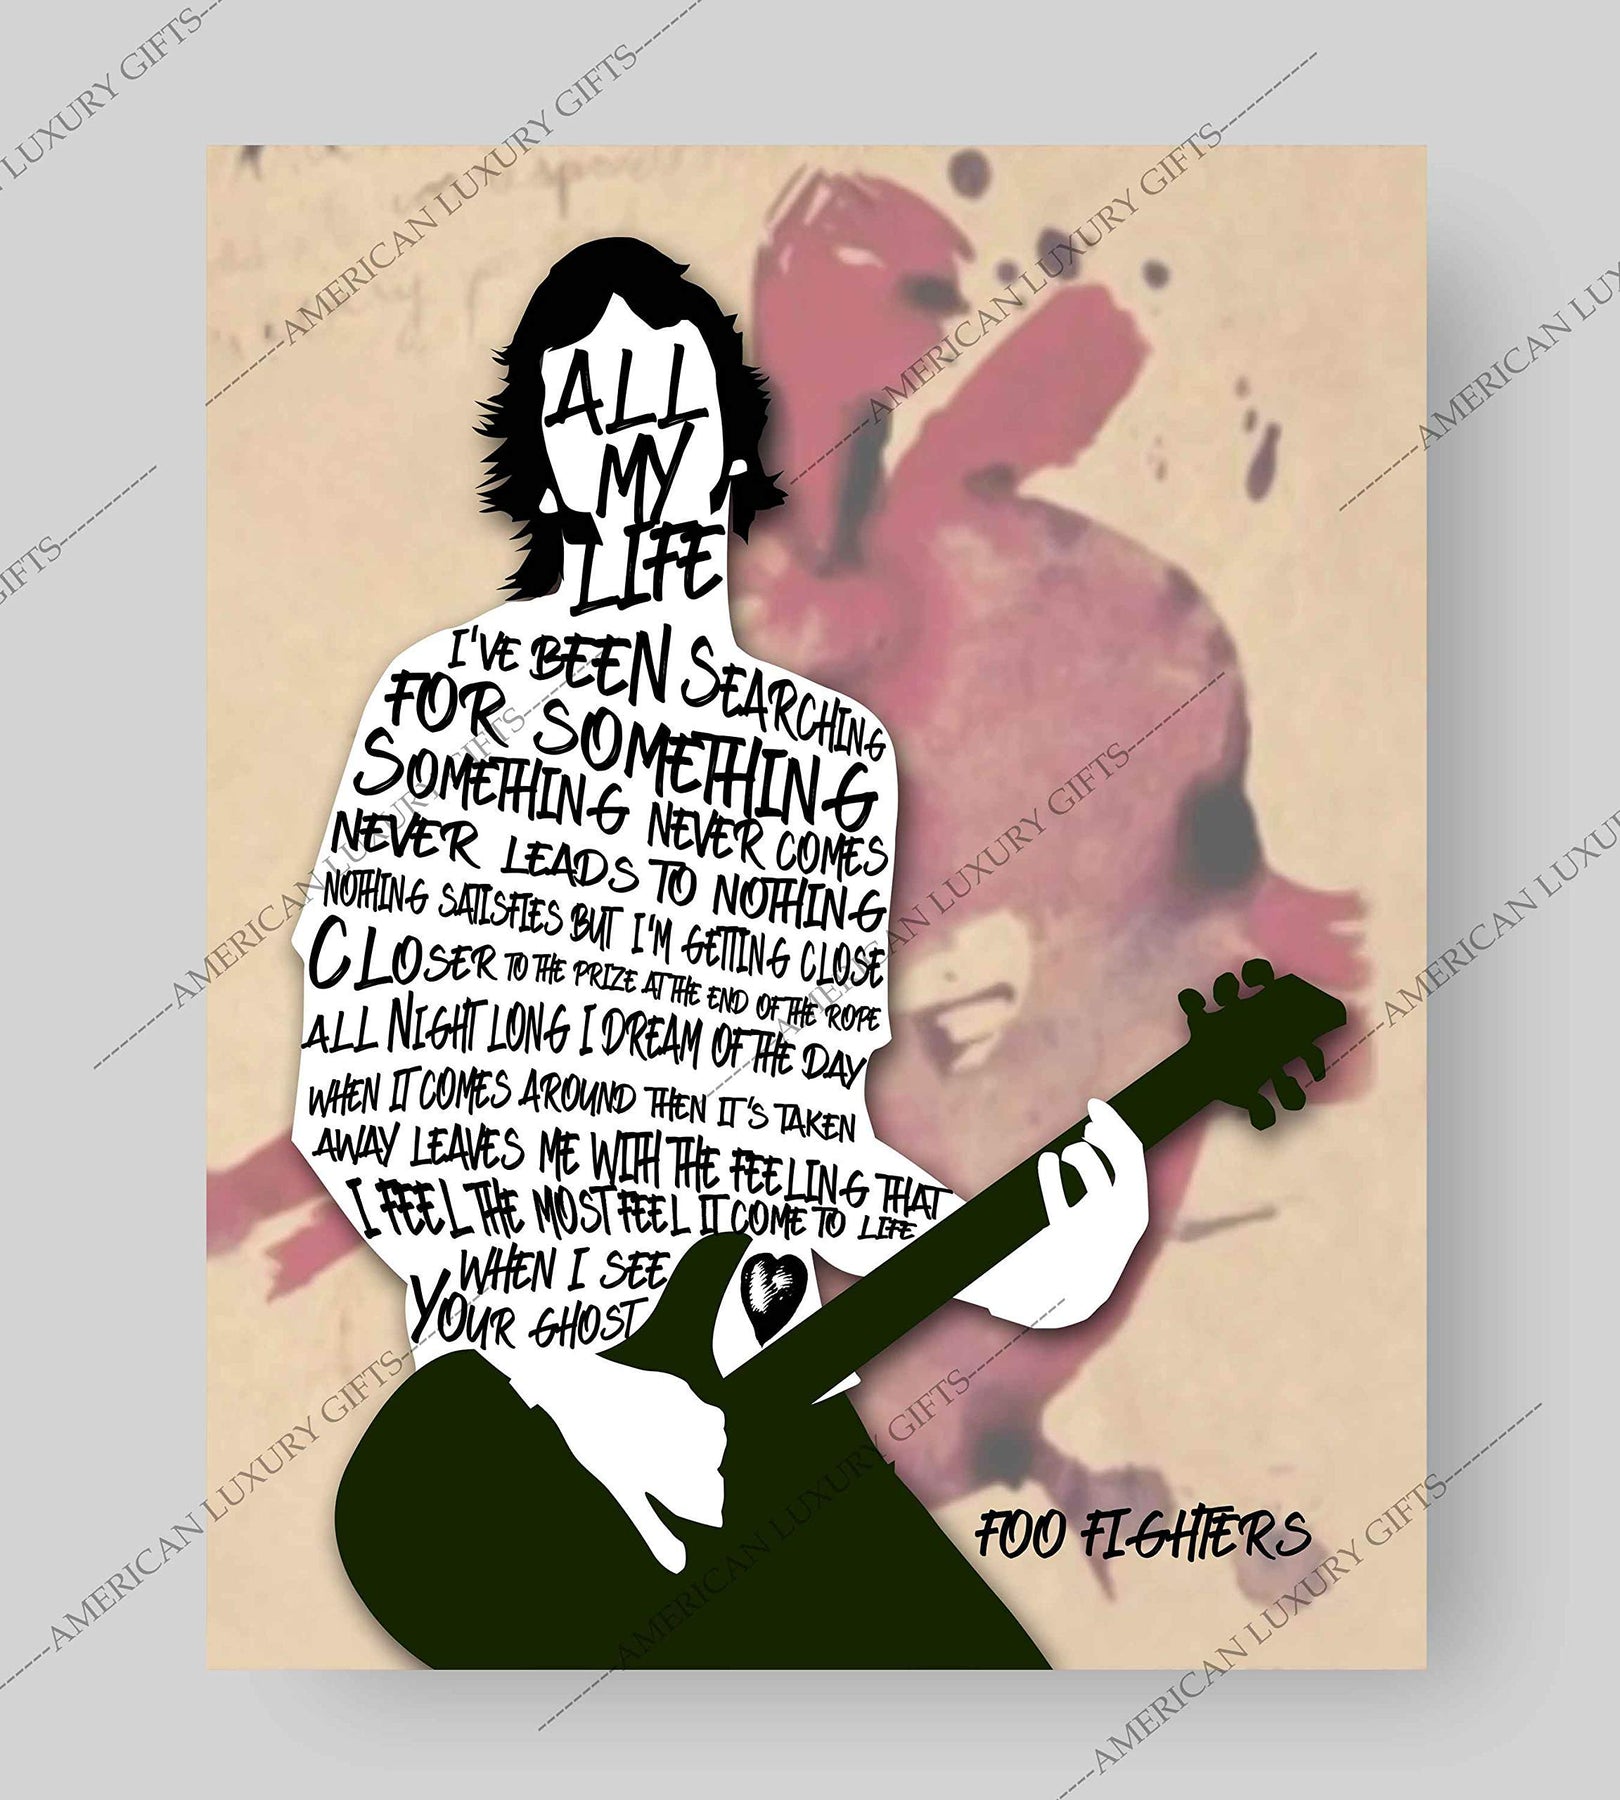 Foo Fighters - My Hero Lyrics Poster for Sale by AspectsOfDreams